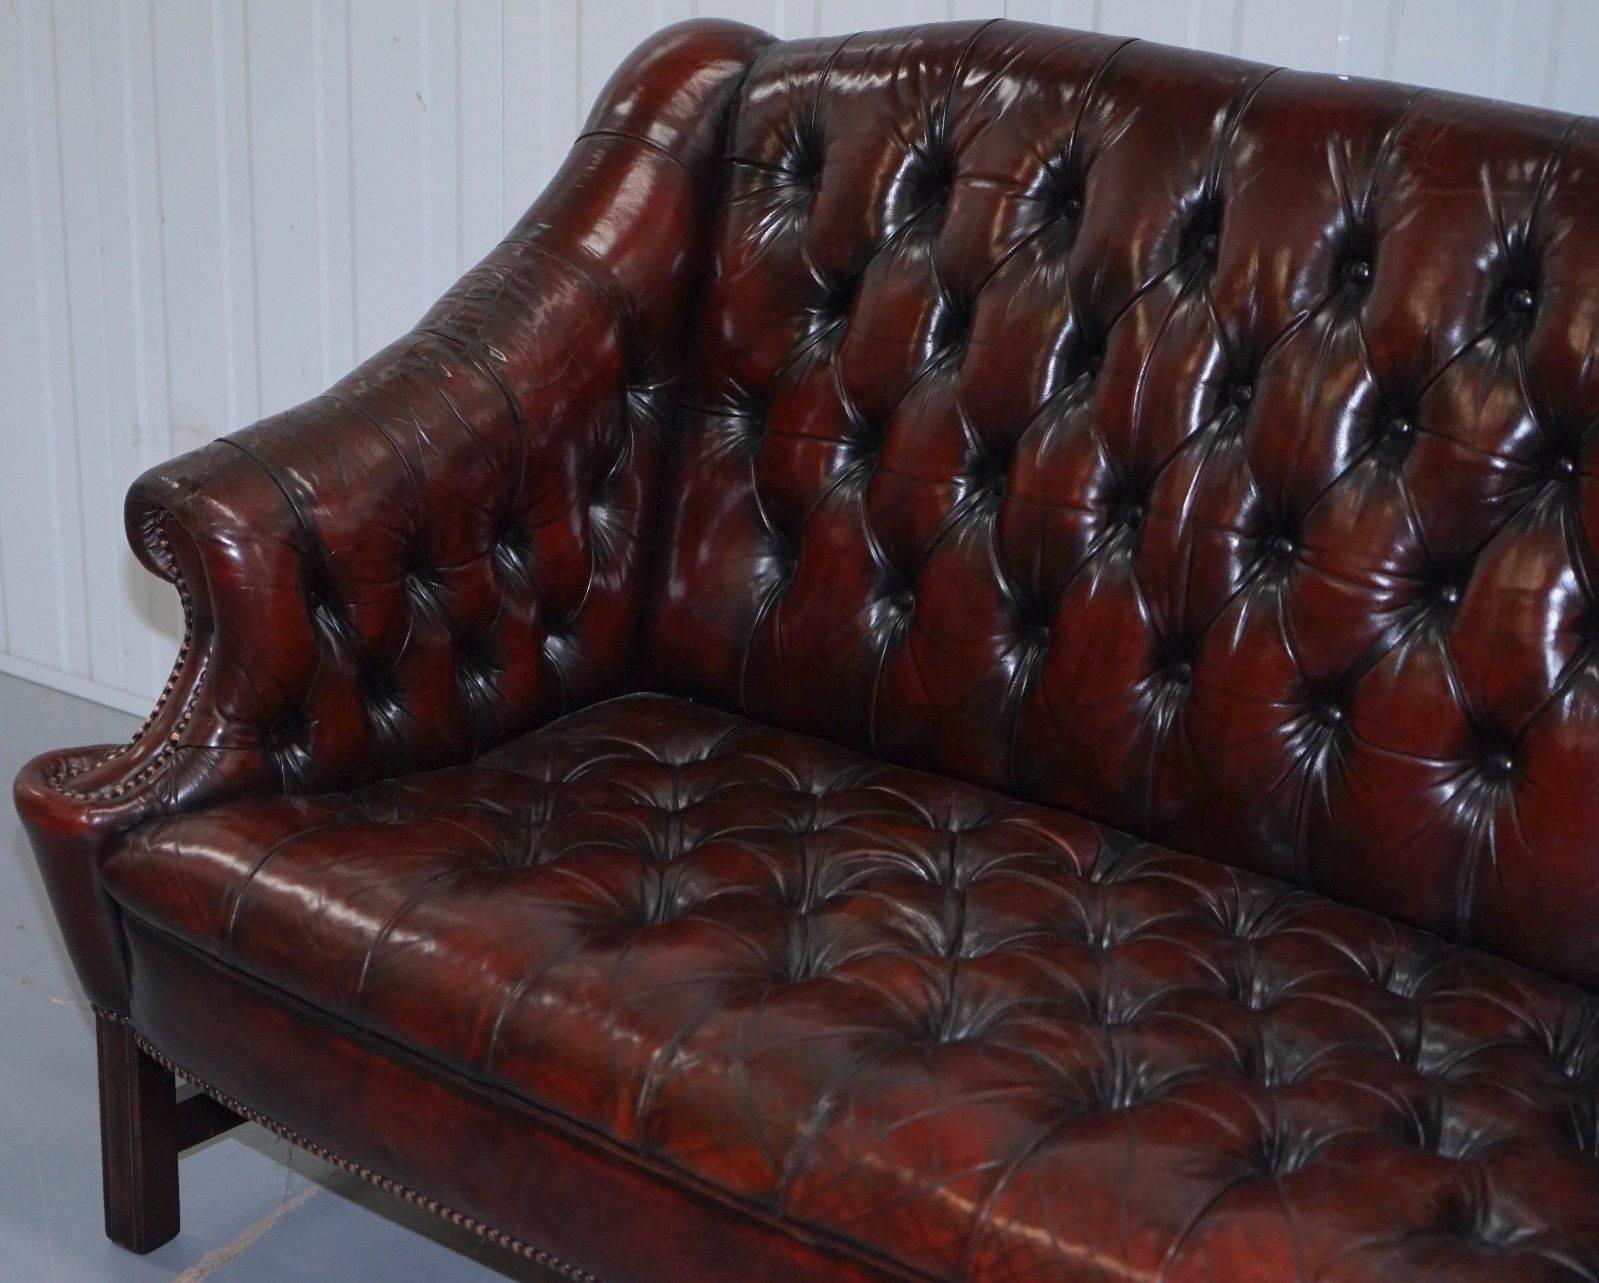 British Top to Bottom Restored Regency Styled Chesterfield Two-Seater Club Bench